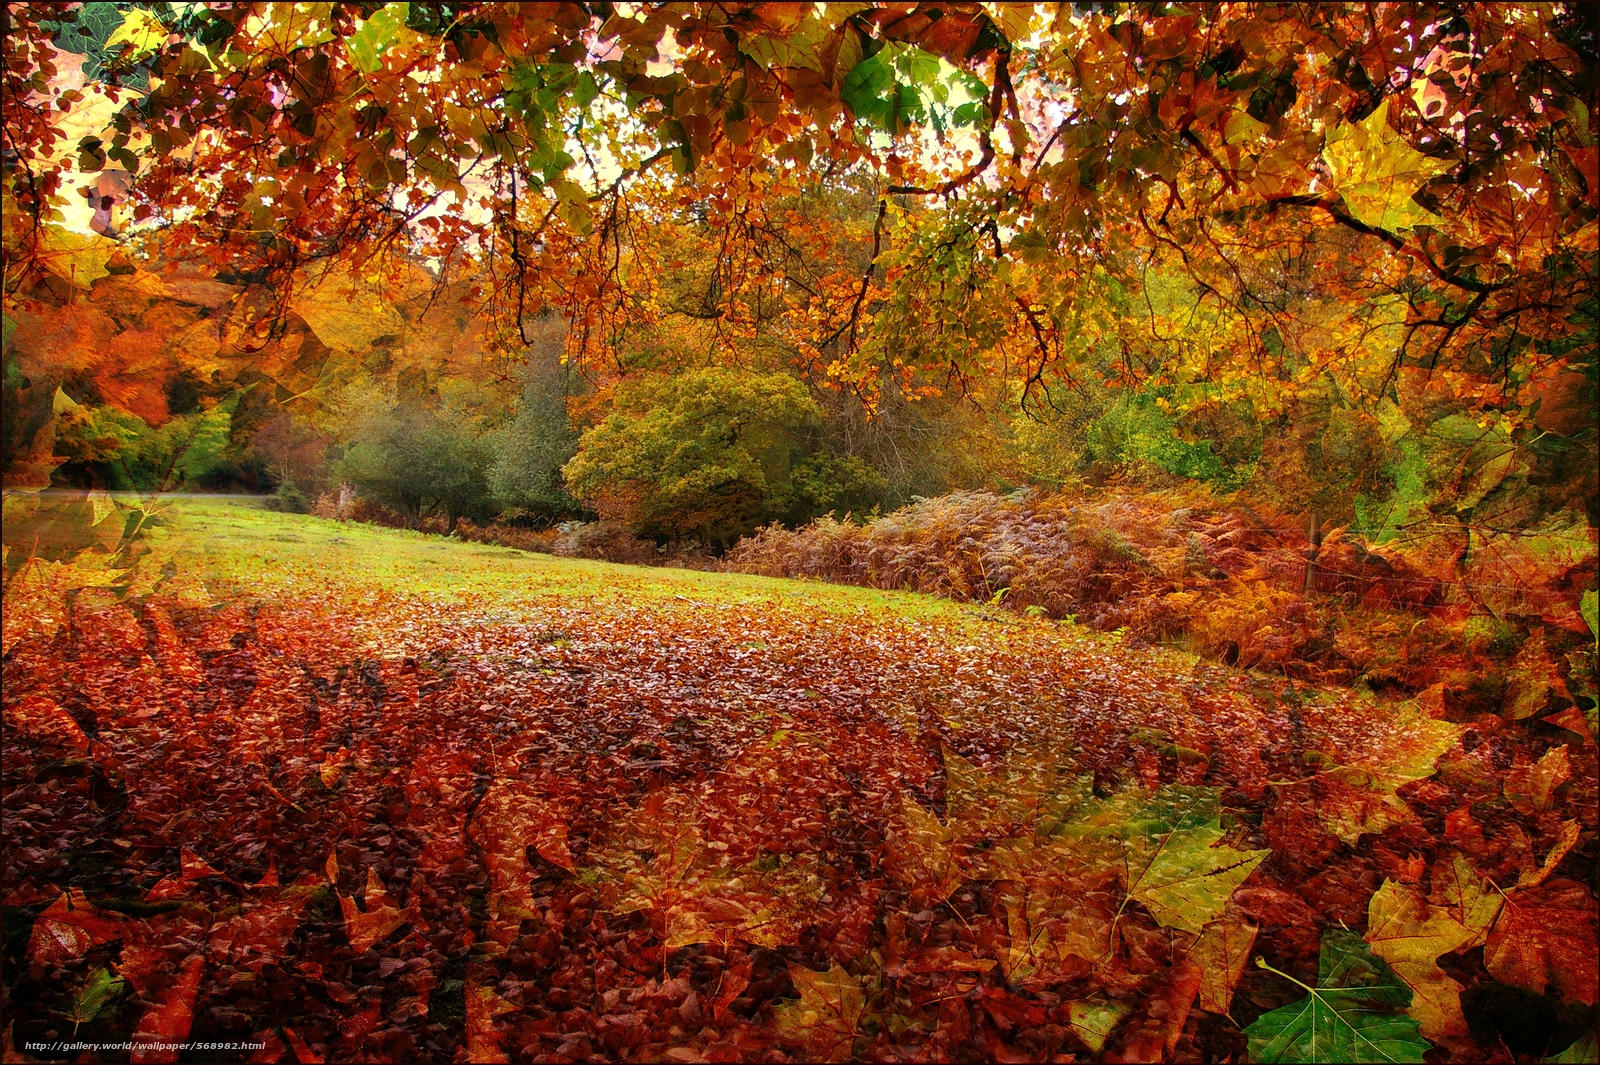 Download wallpaper autumn New Forest in Hampshire England free